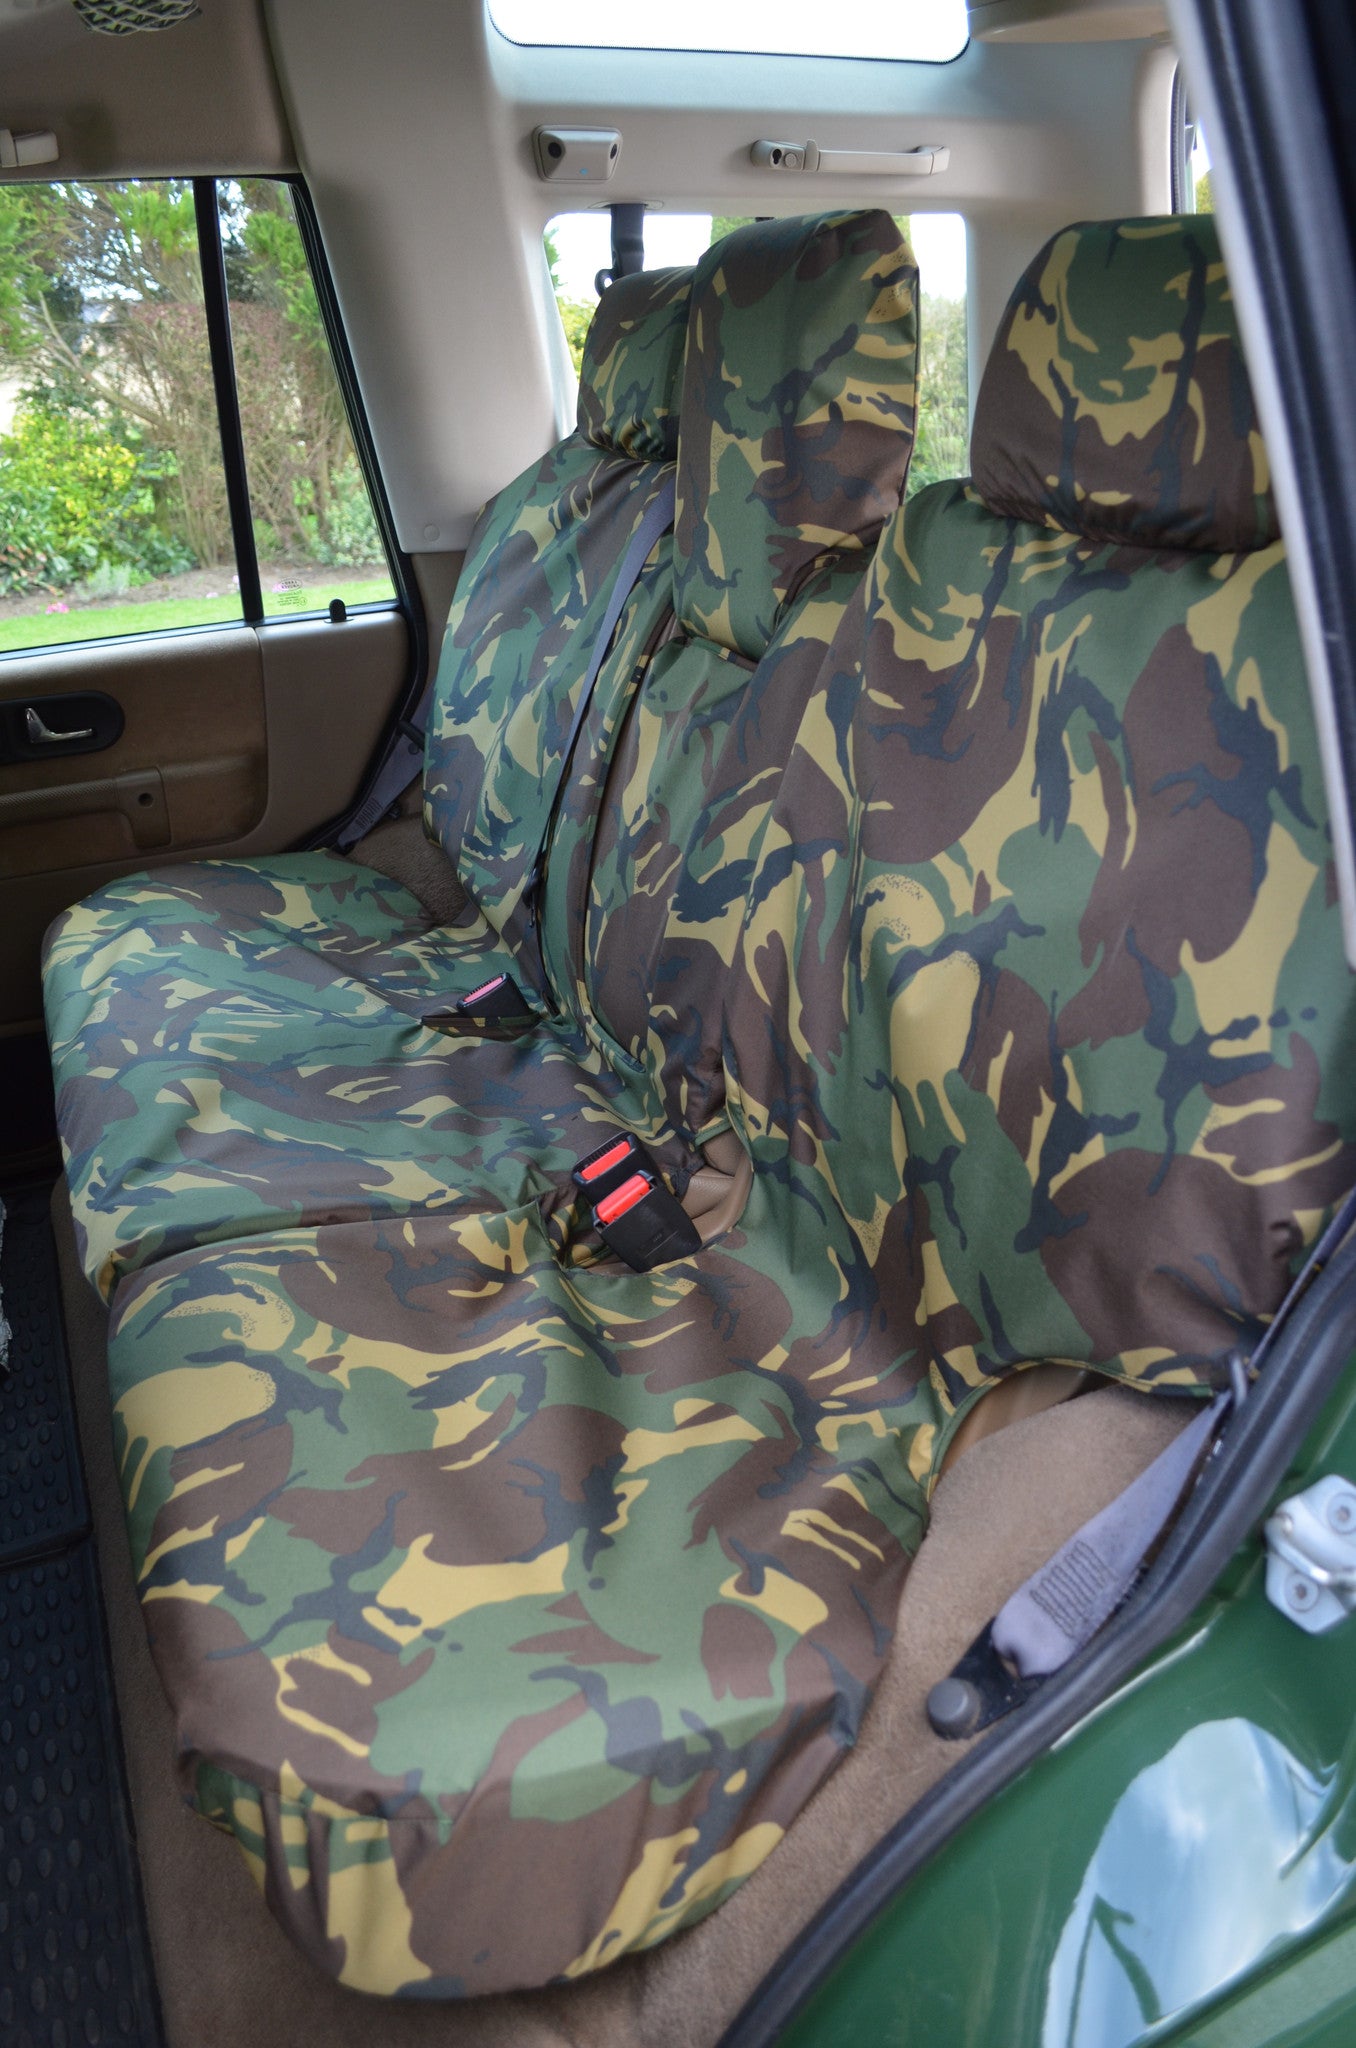 Land Rover Discovery 1998 - 2004 Series 2 Seat Covers Rear 2nd Row / Green Camo Turtle Covers Ltd